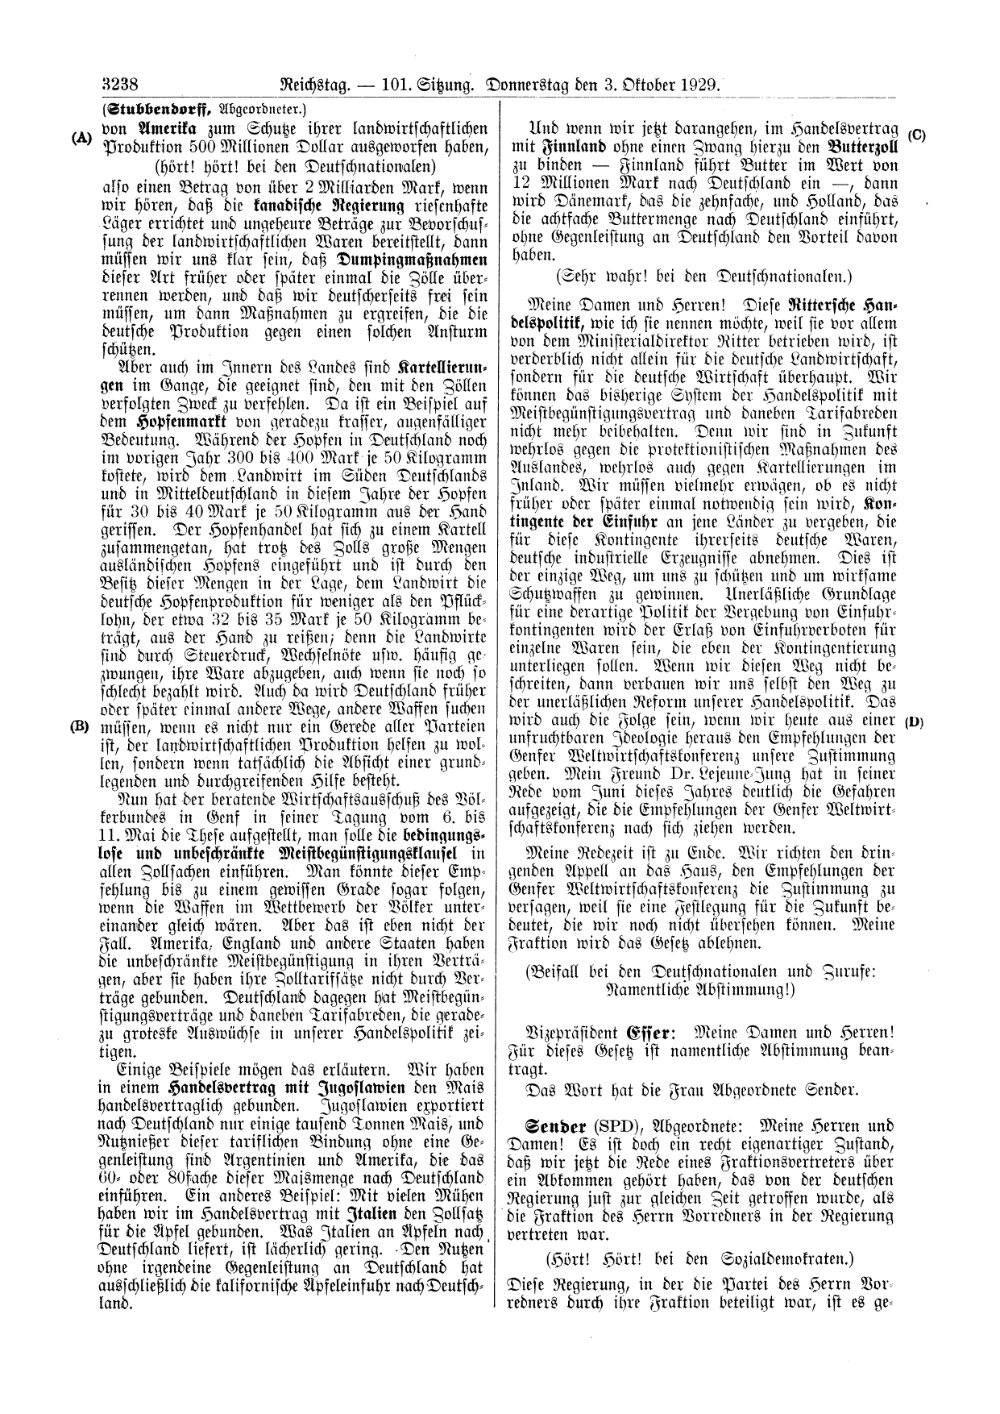 Scan of page 3238